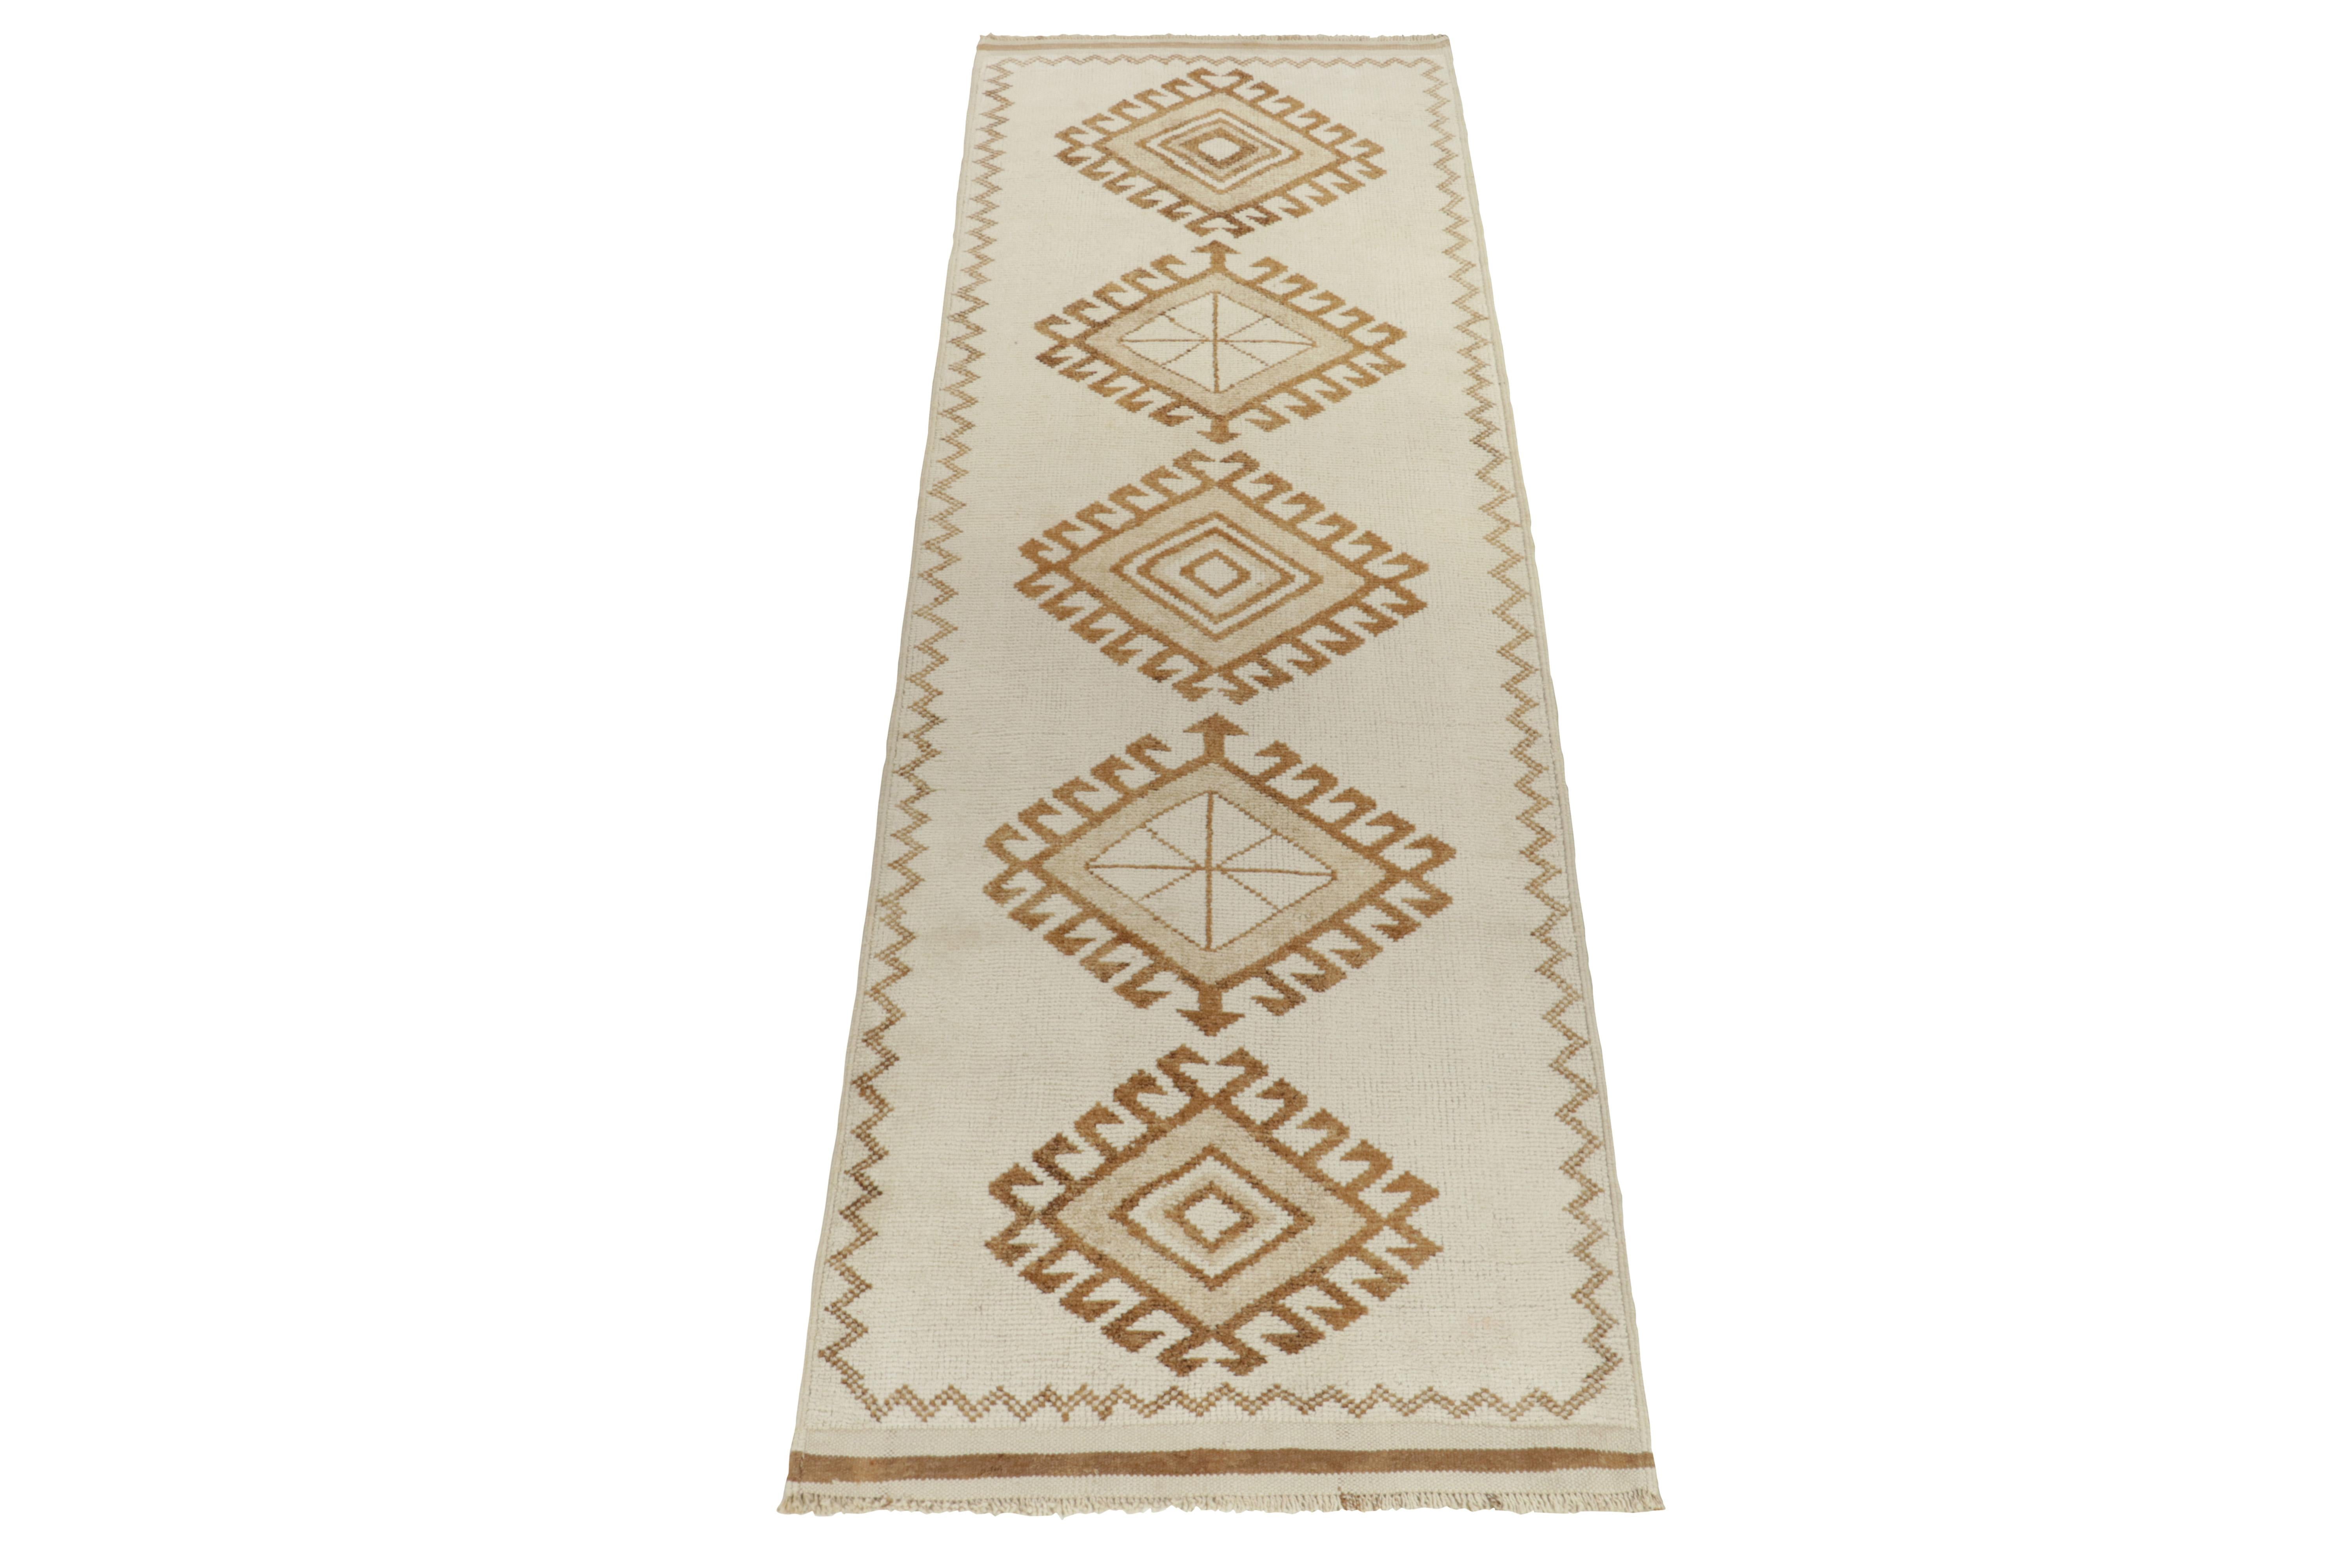 From Rug & Kilim’s vintage selections, a 4x12 hand-knotted wool runner a refreshing nomadic inspiration. The 1950s tribal piece showcases traditional motifs sitting peacefully on the field in creamy white & gold-brown tones further complementing the